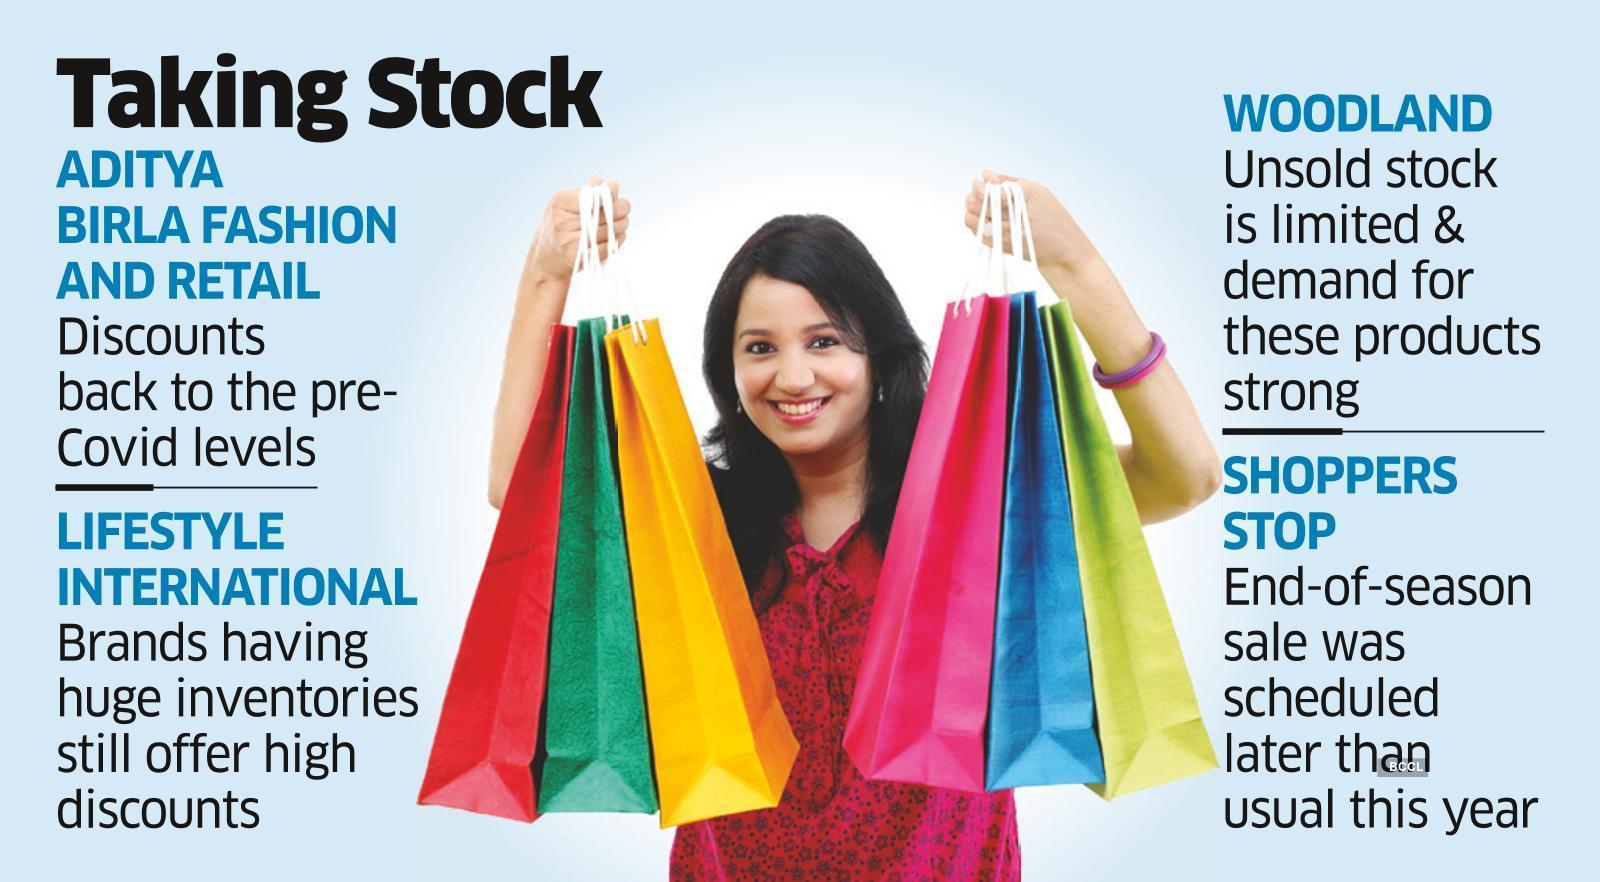 India’s leading retail chains plan to hold back on discounts